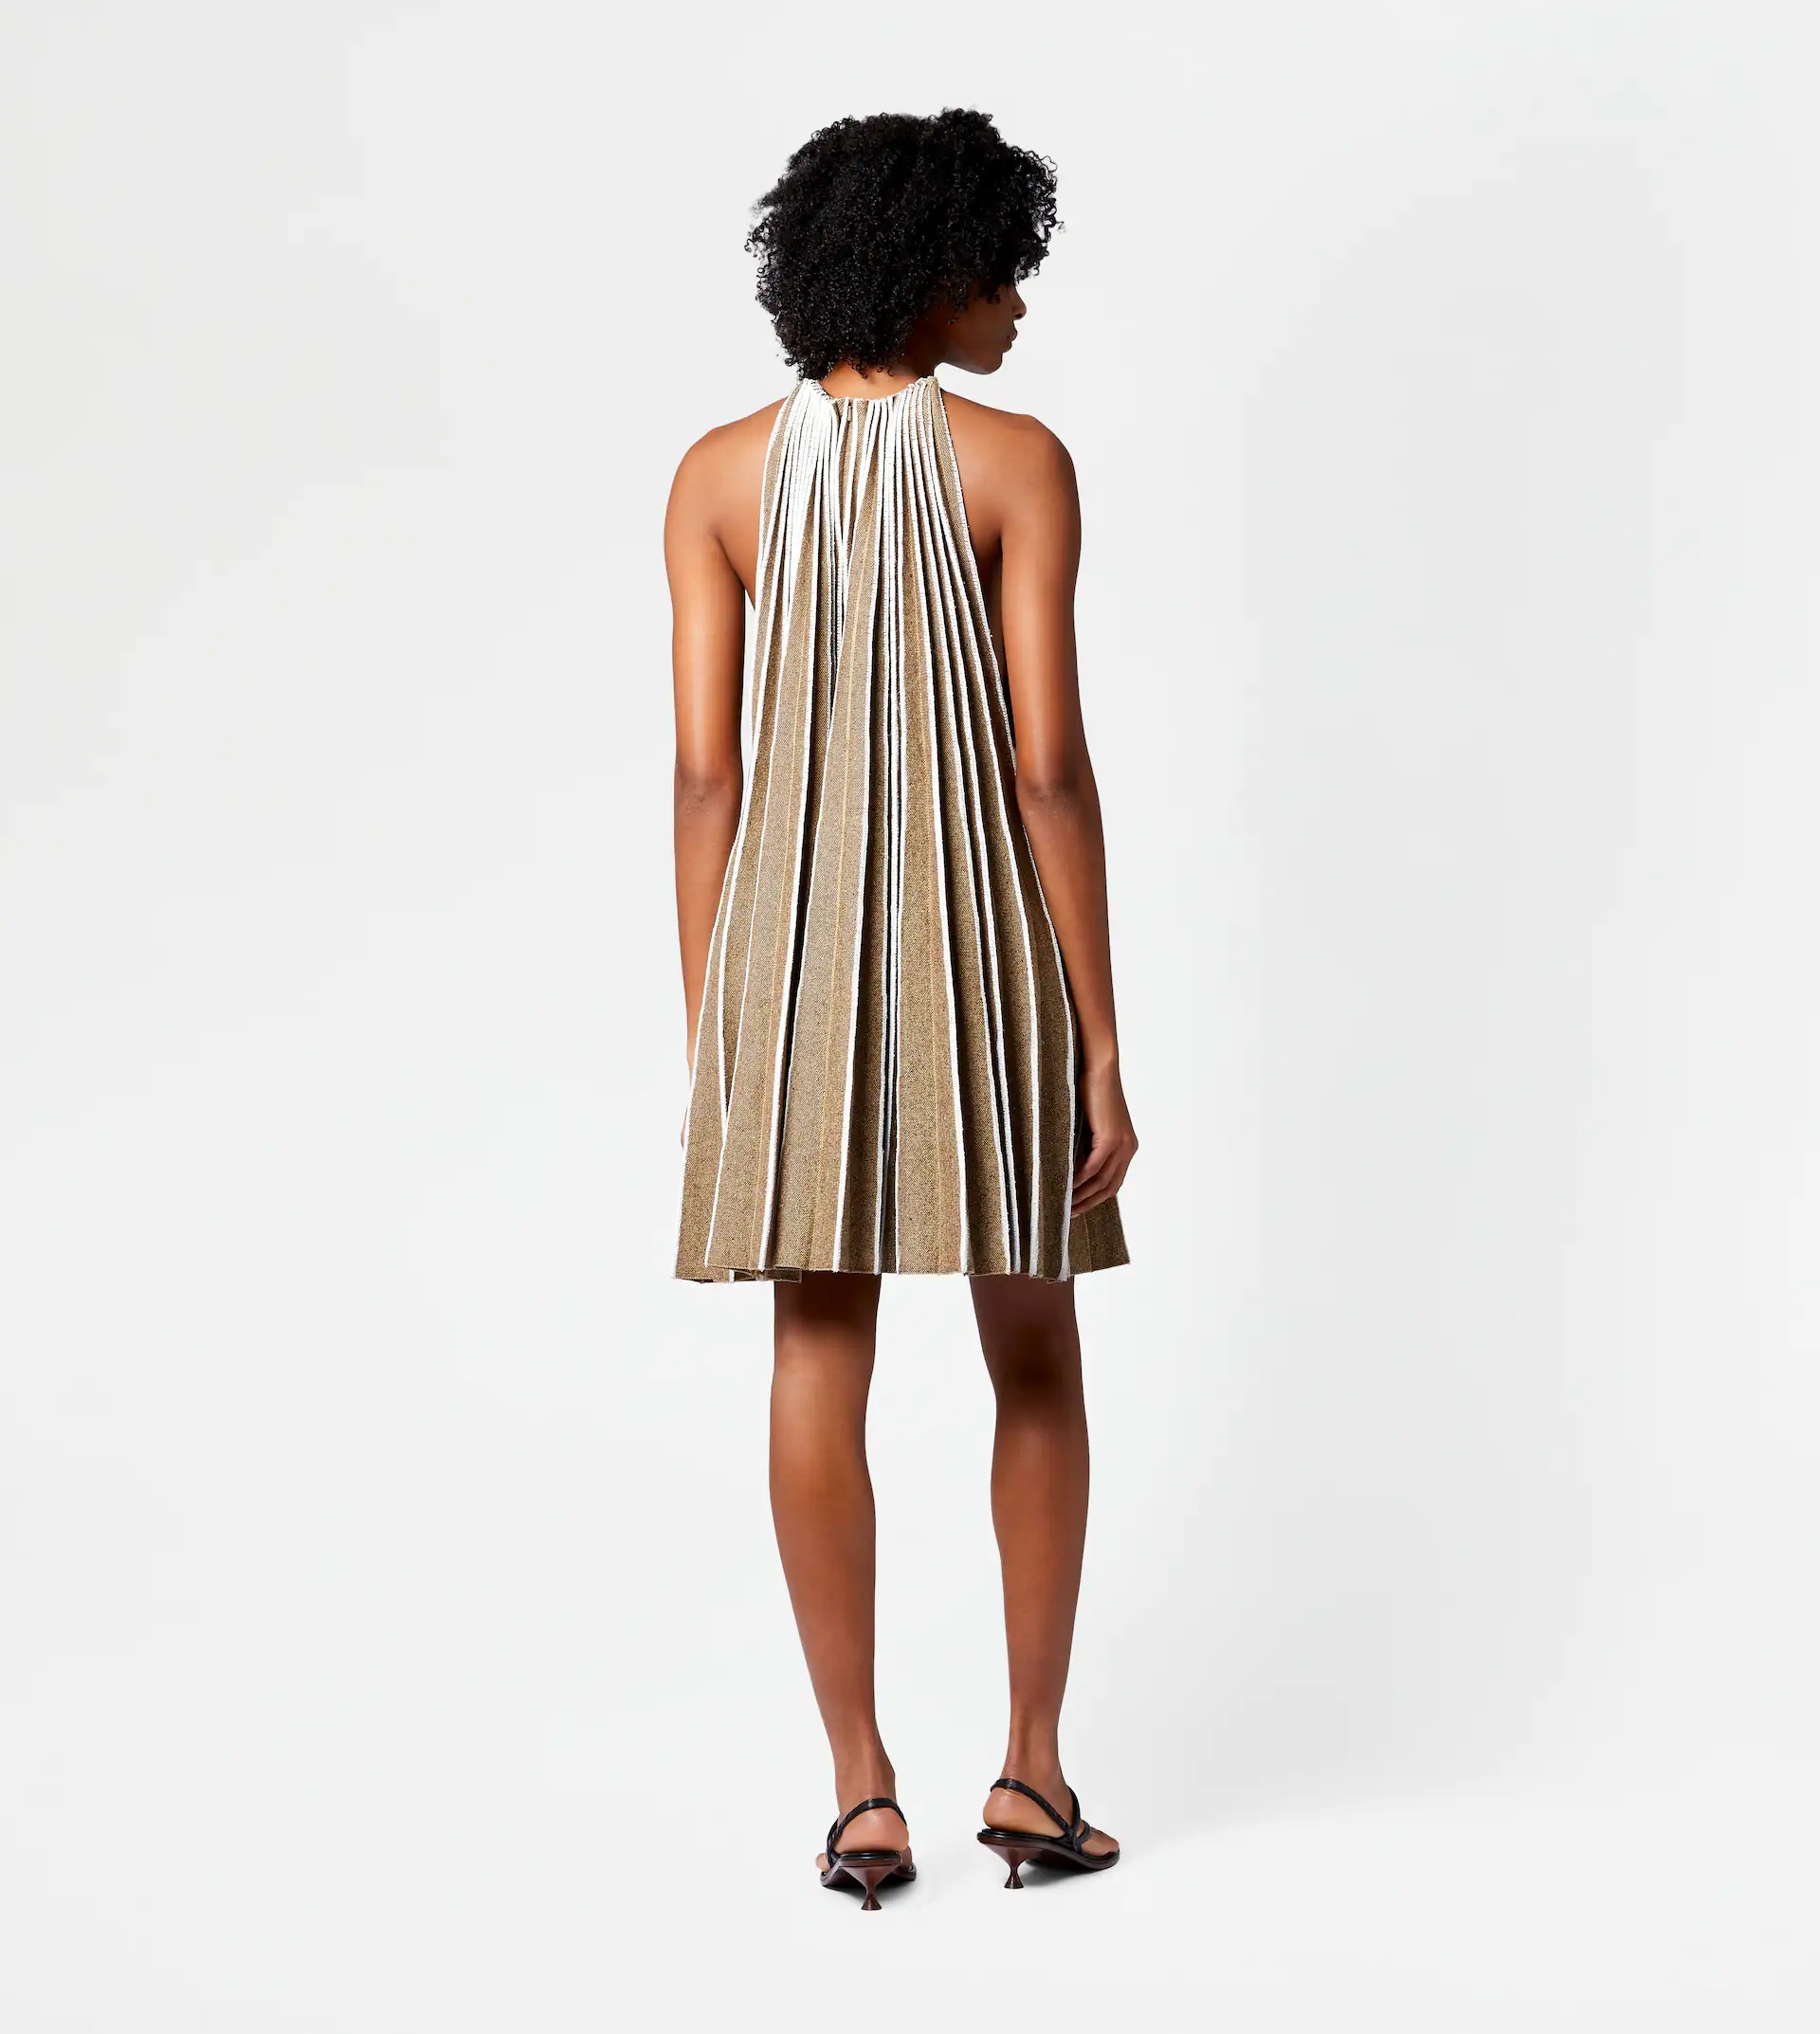 PLEATED DRESS - BROWN, WHITE - 3